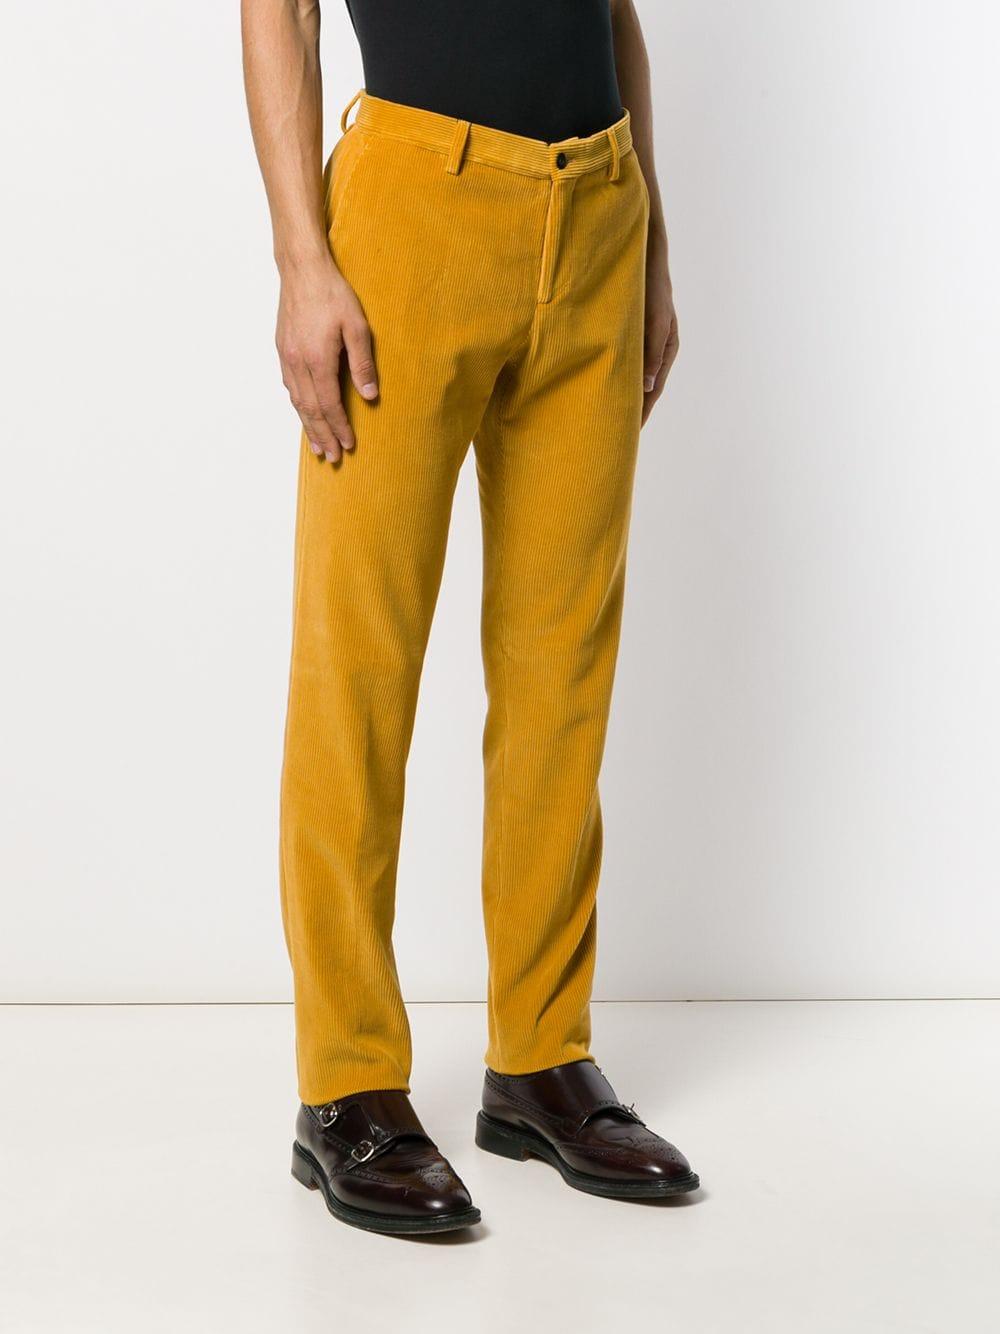 Etro Corduroy Straight-leg Trousers in Yellow for Men - Lyst